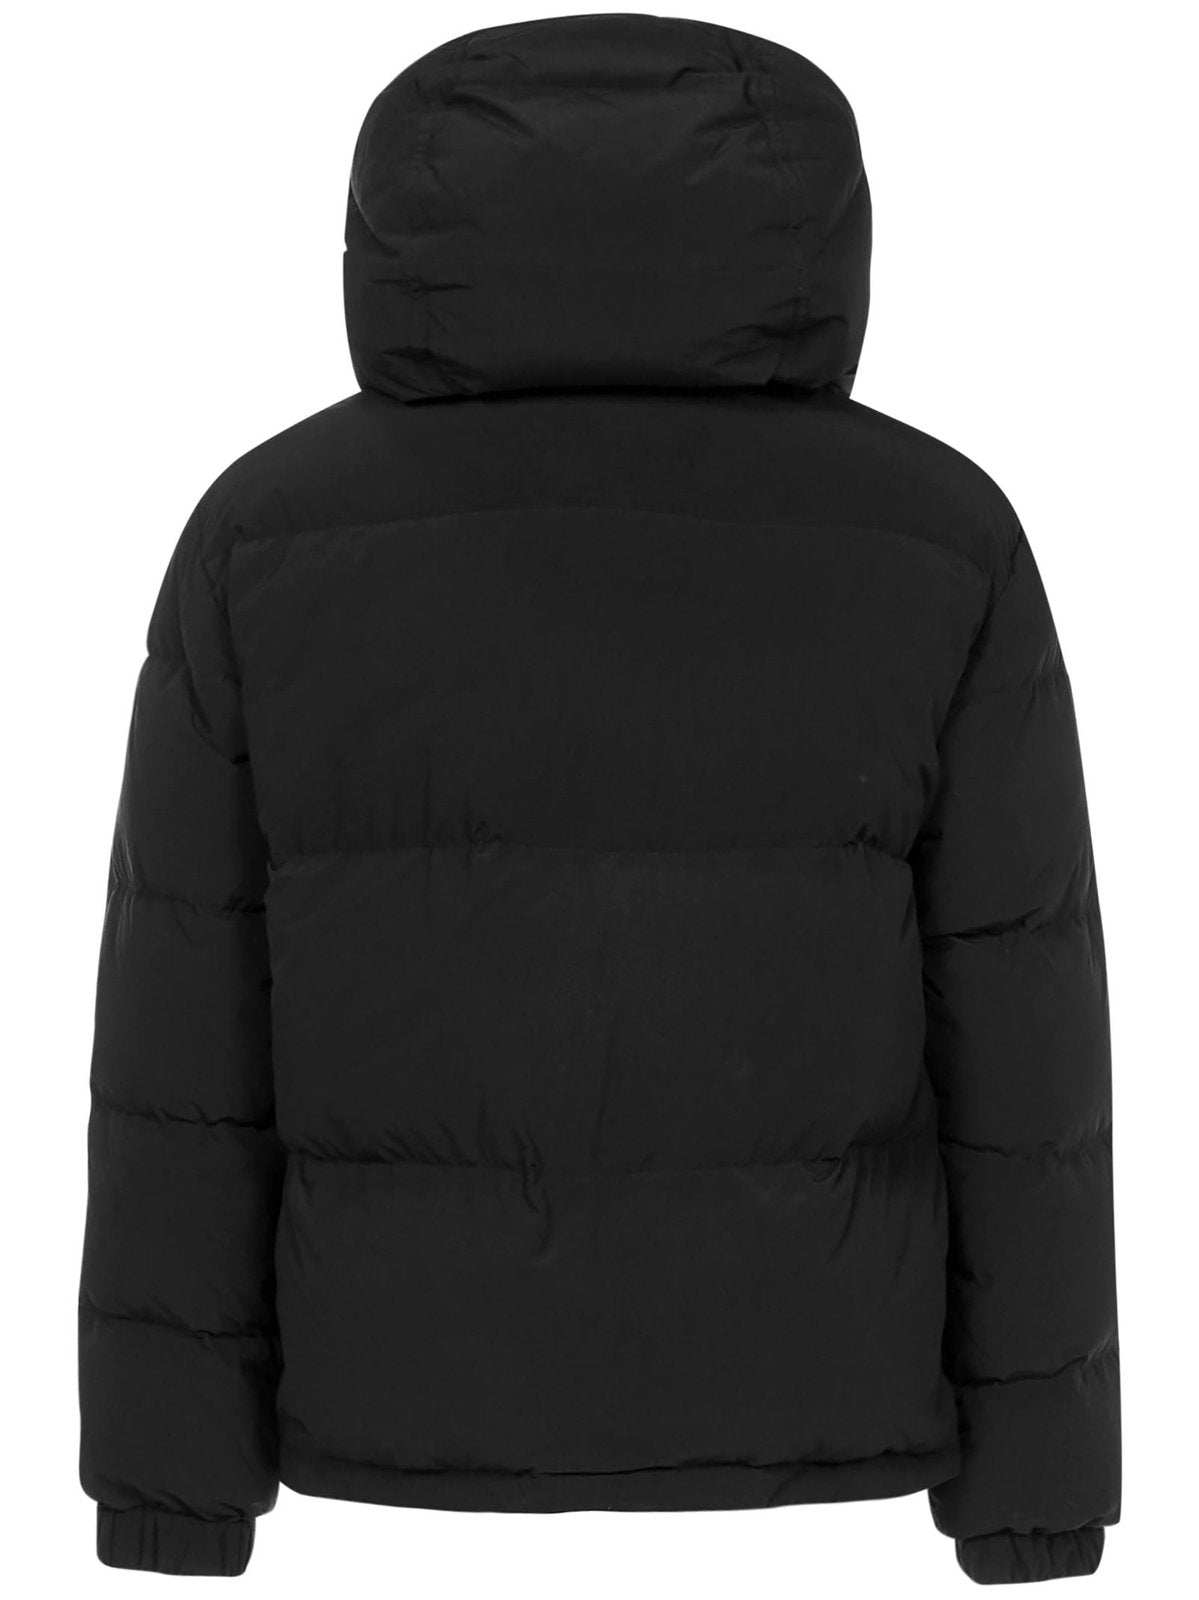 Off-White Zip-Up Long-Sleeved Puffer Coat